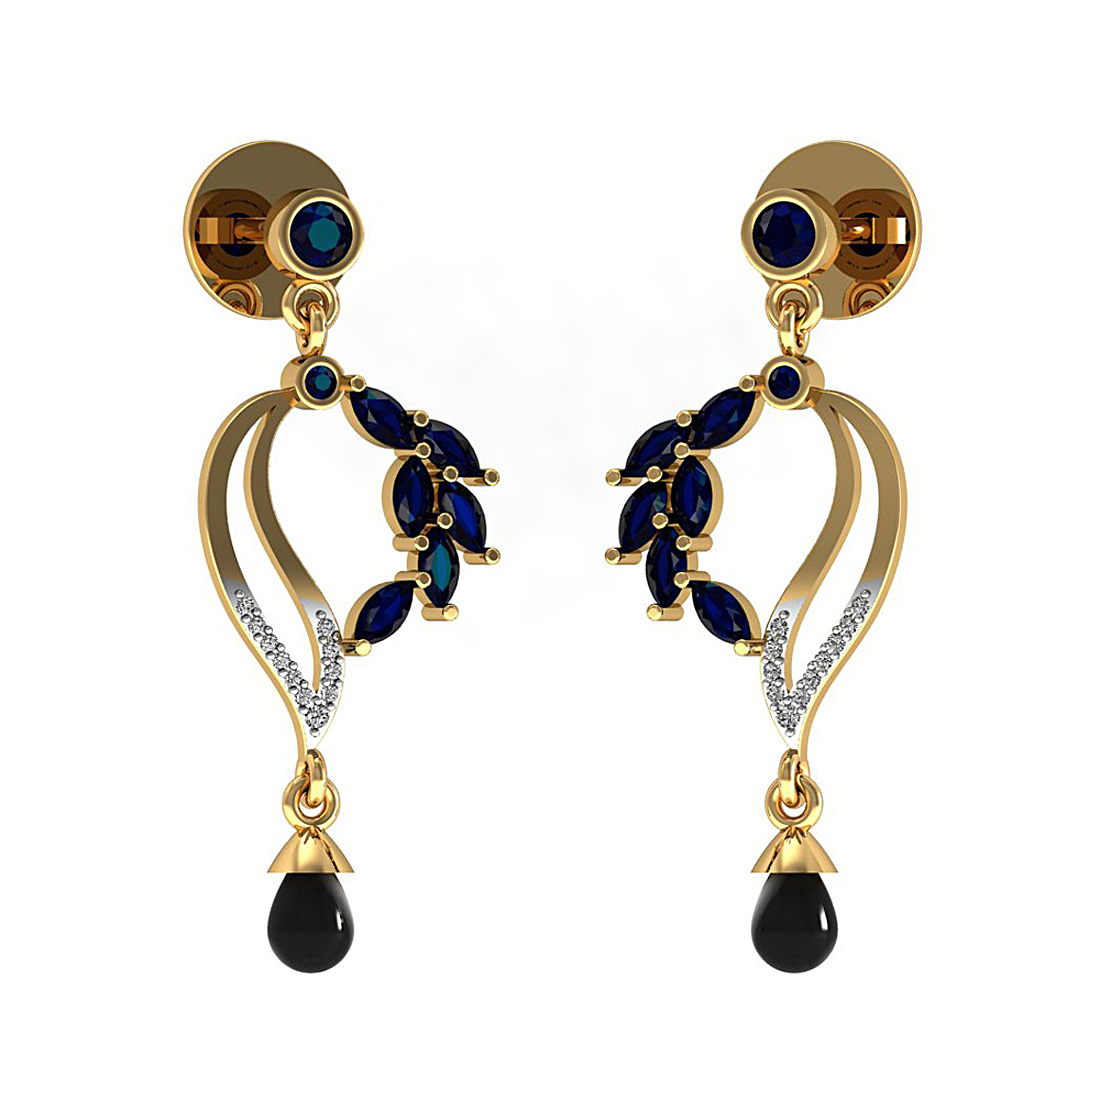 Diamond & onyx dangle drop earrings made in 18k gold with sapphire